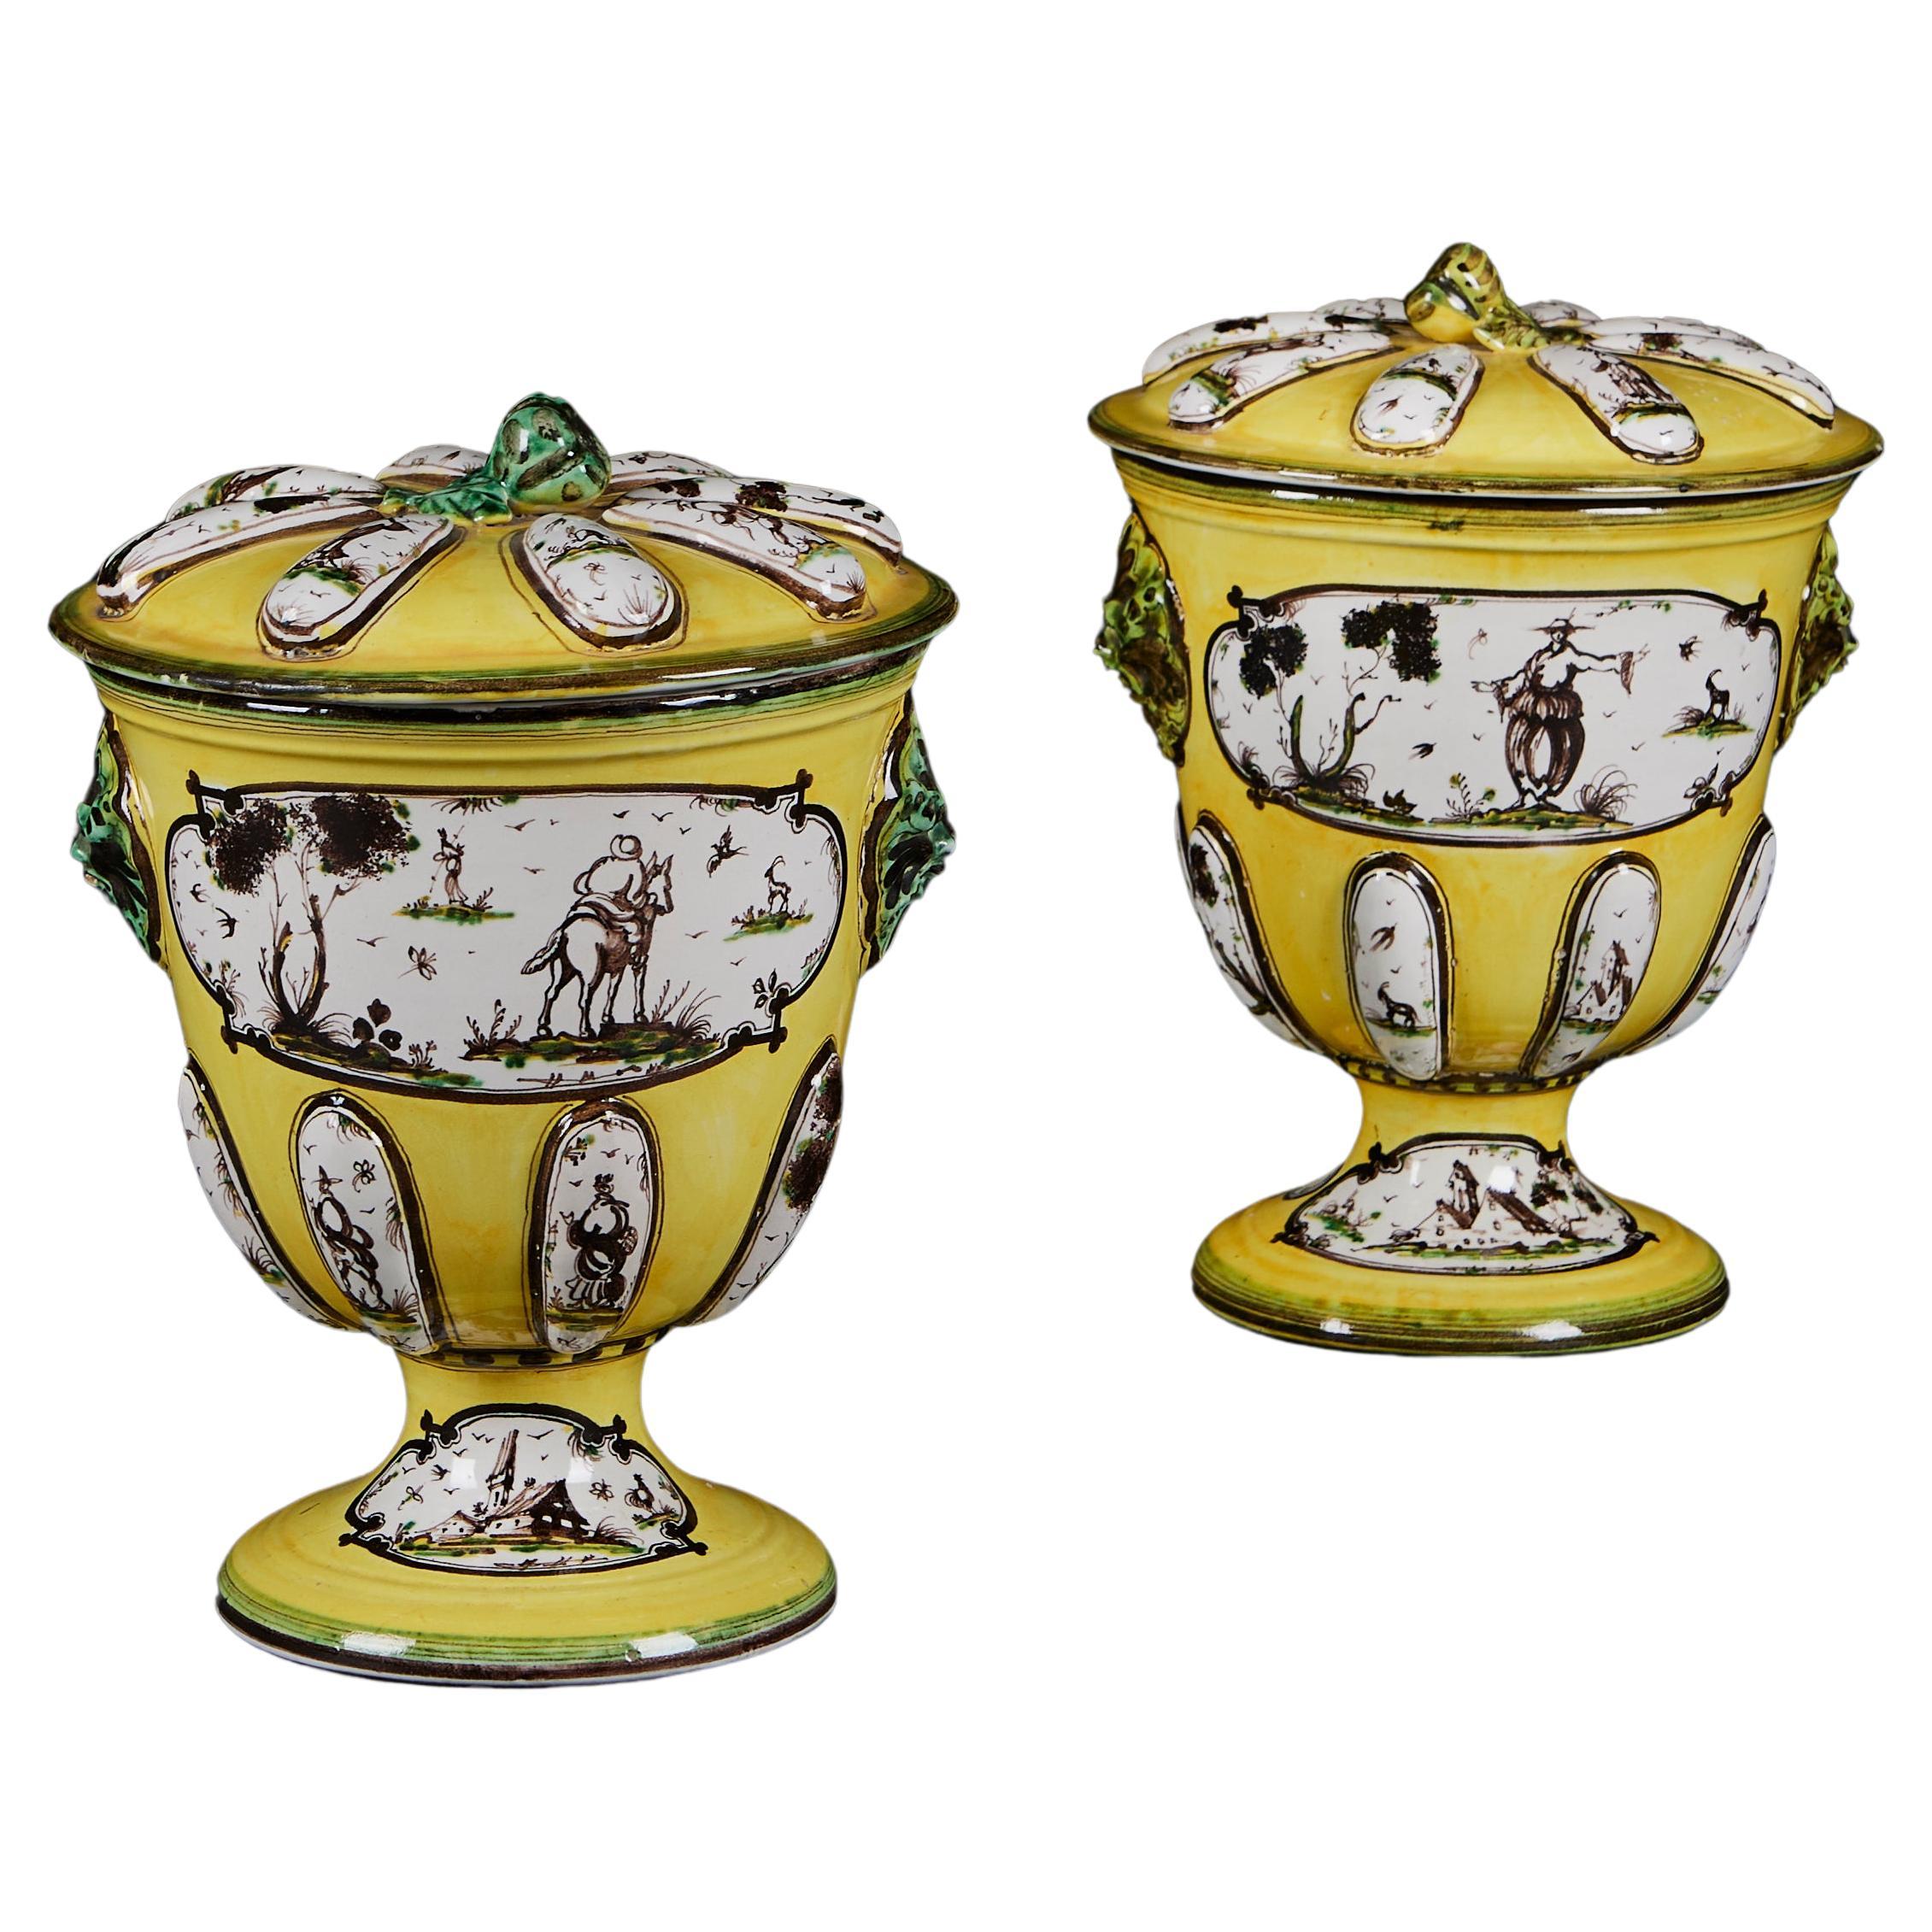 A Pair of Yellow 19th Century French Faience Cache Pots with Lids